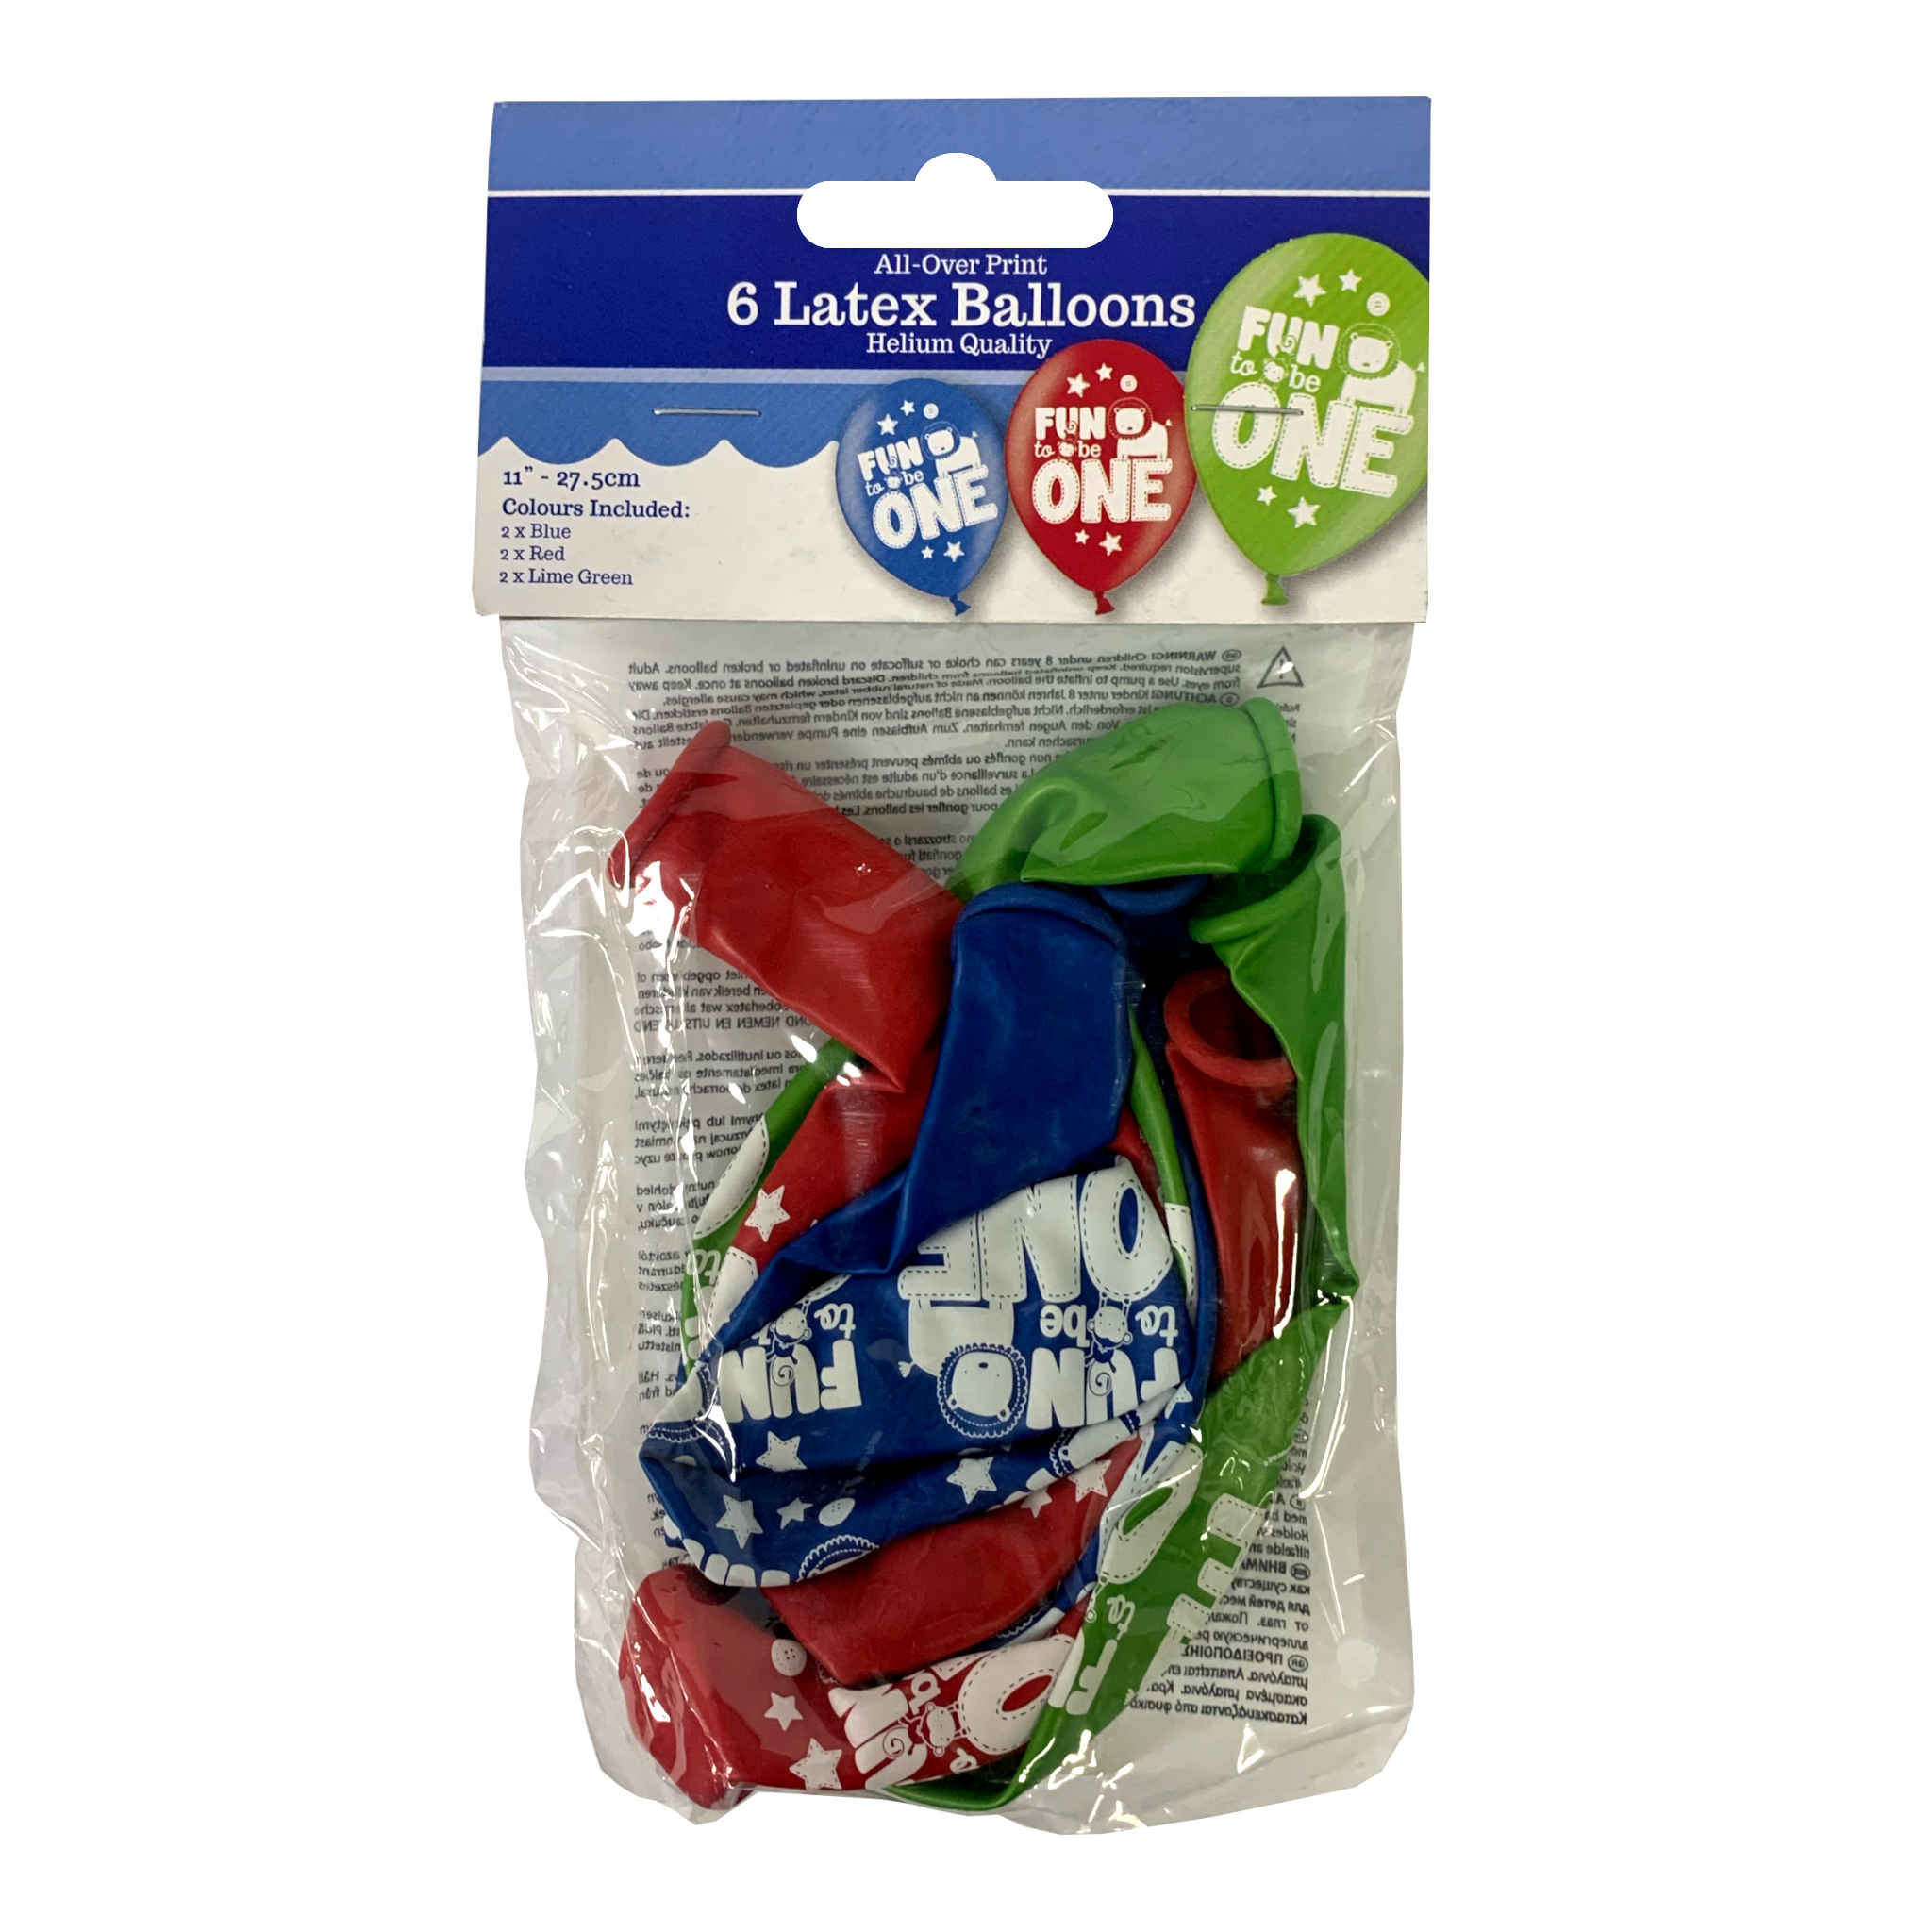 All Over Print Latex Balloons Fun to be One | 6 Pack